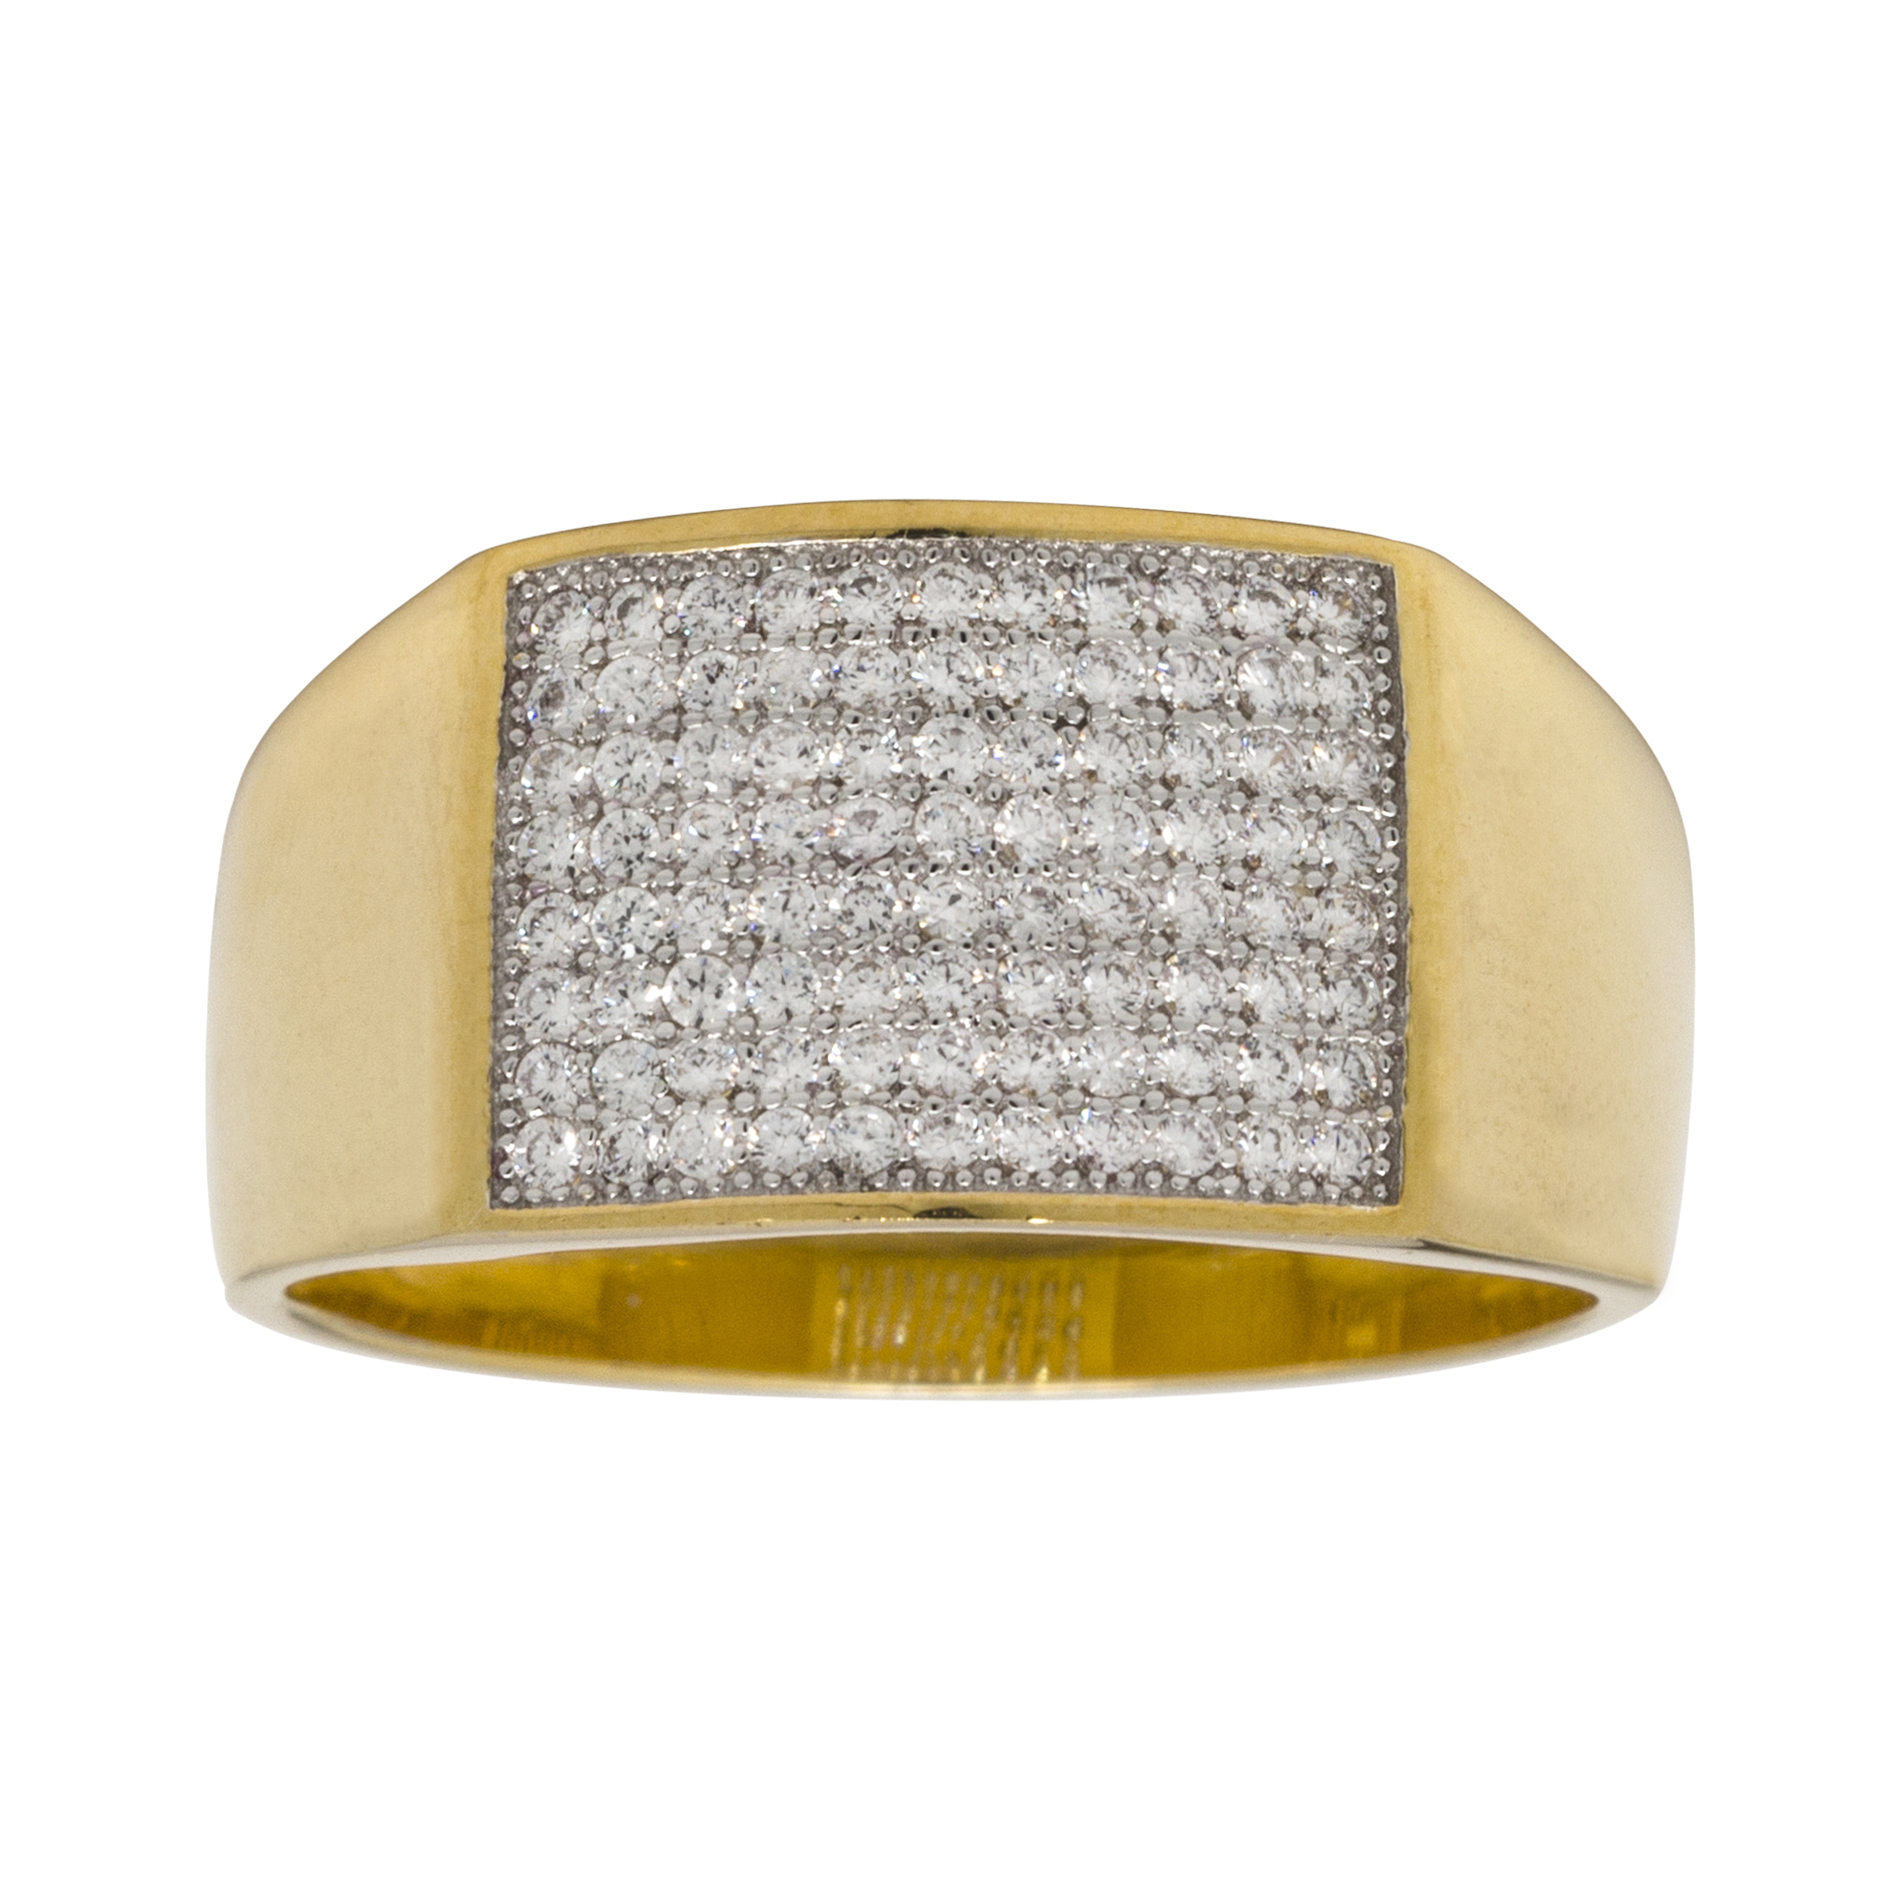 Men's Cubic Zirconia Ring Gold over Sterling Silver